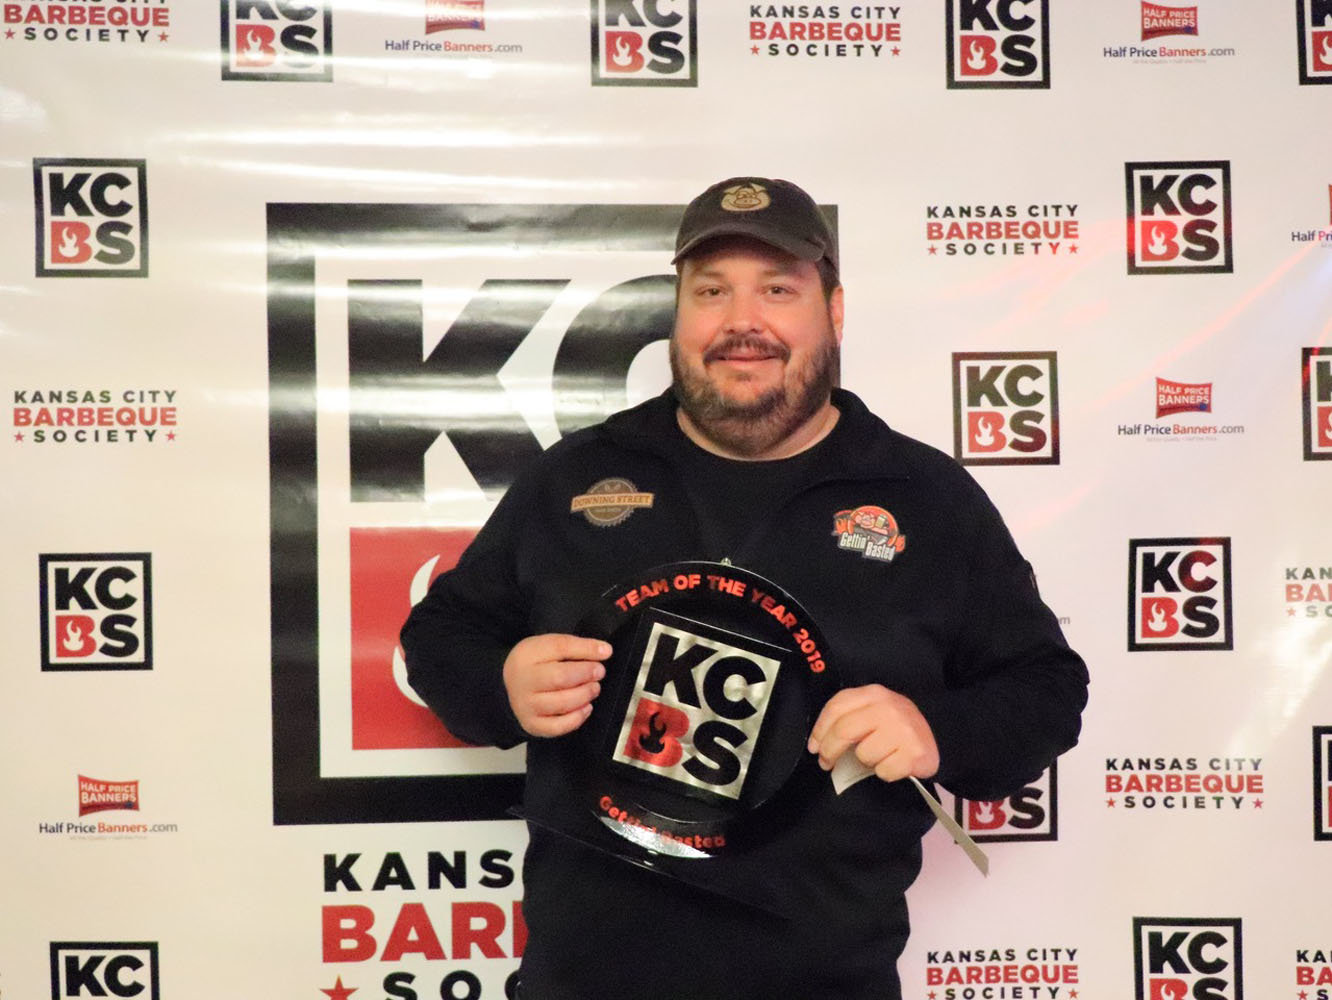 BEST BBQ
Pitmaster Brad Leighninger of the Gettin’ Basted competitive barbecue team holds the fourth-place award for the 2019 Team of the Year from the Kansas City Barbecue Society. Leighninger also took home top honors in four barbecue meat categories. Organizers say over 2,600 pitmasters competed for the trophies and $27,000 in cash prizes.